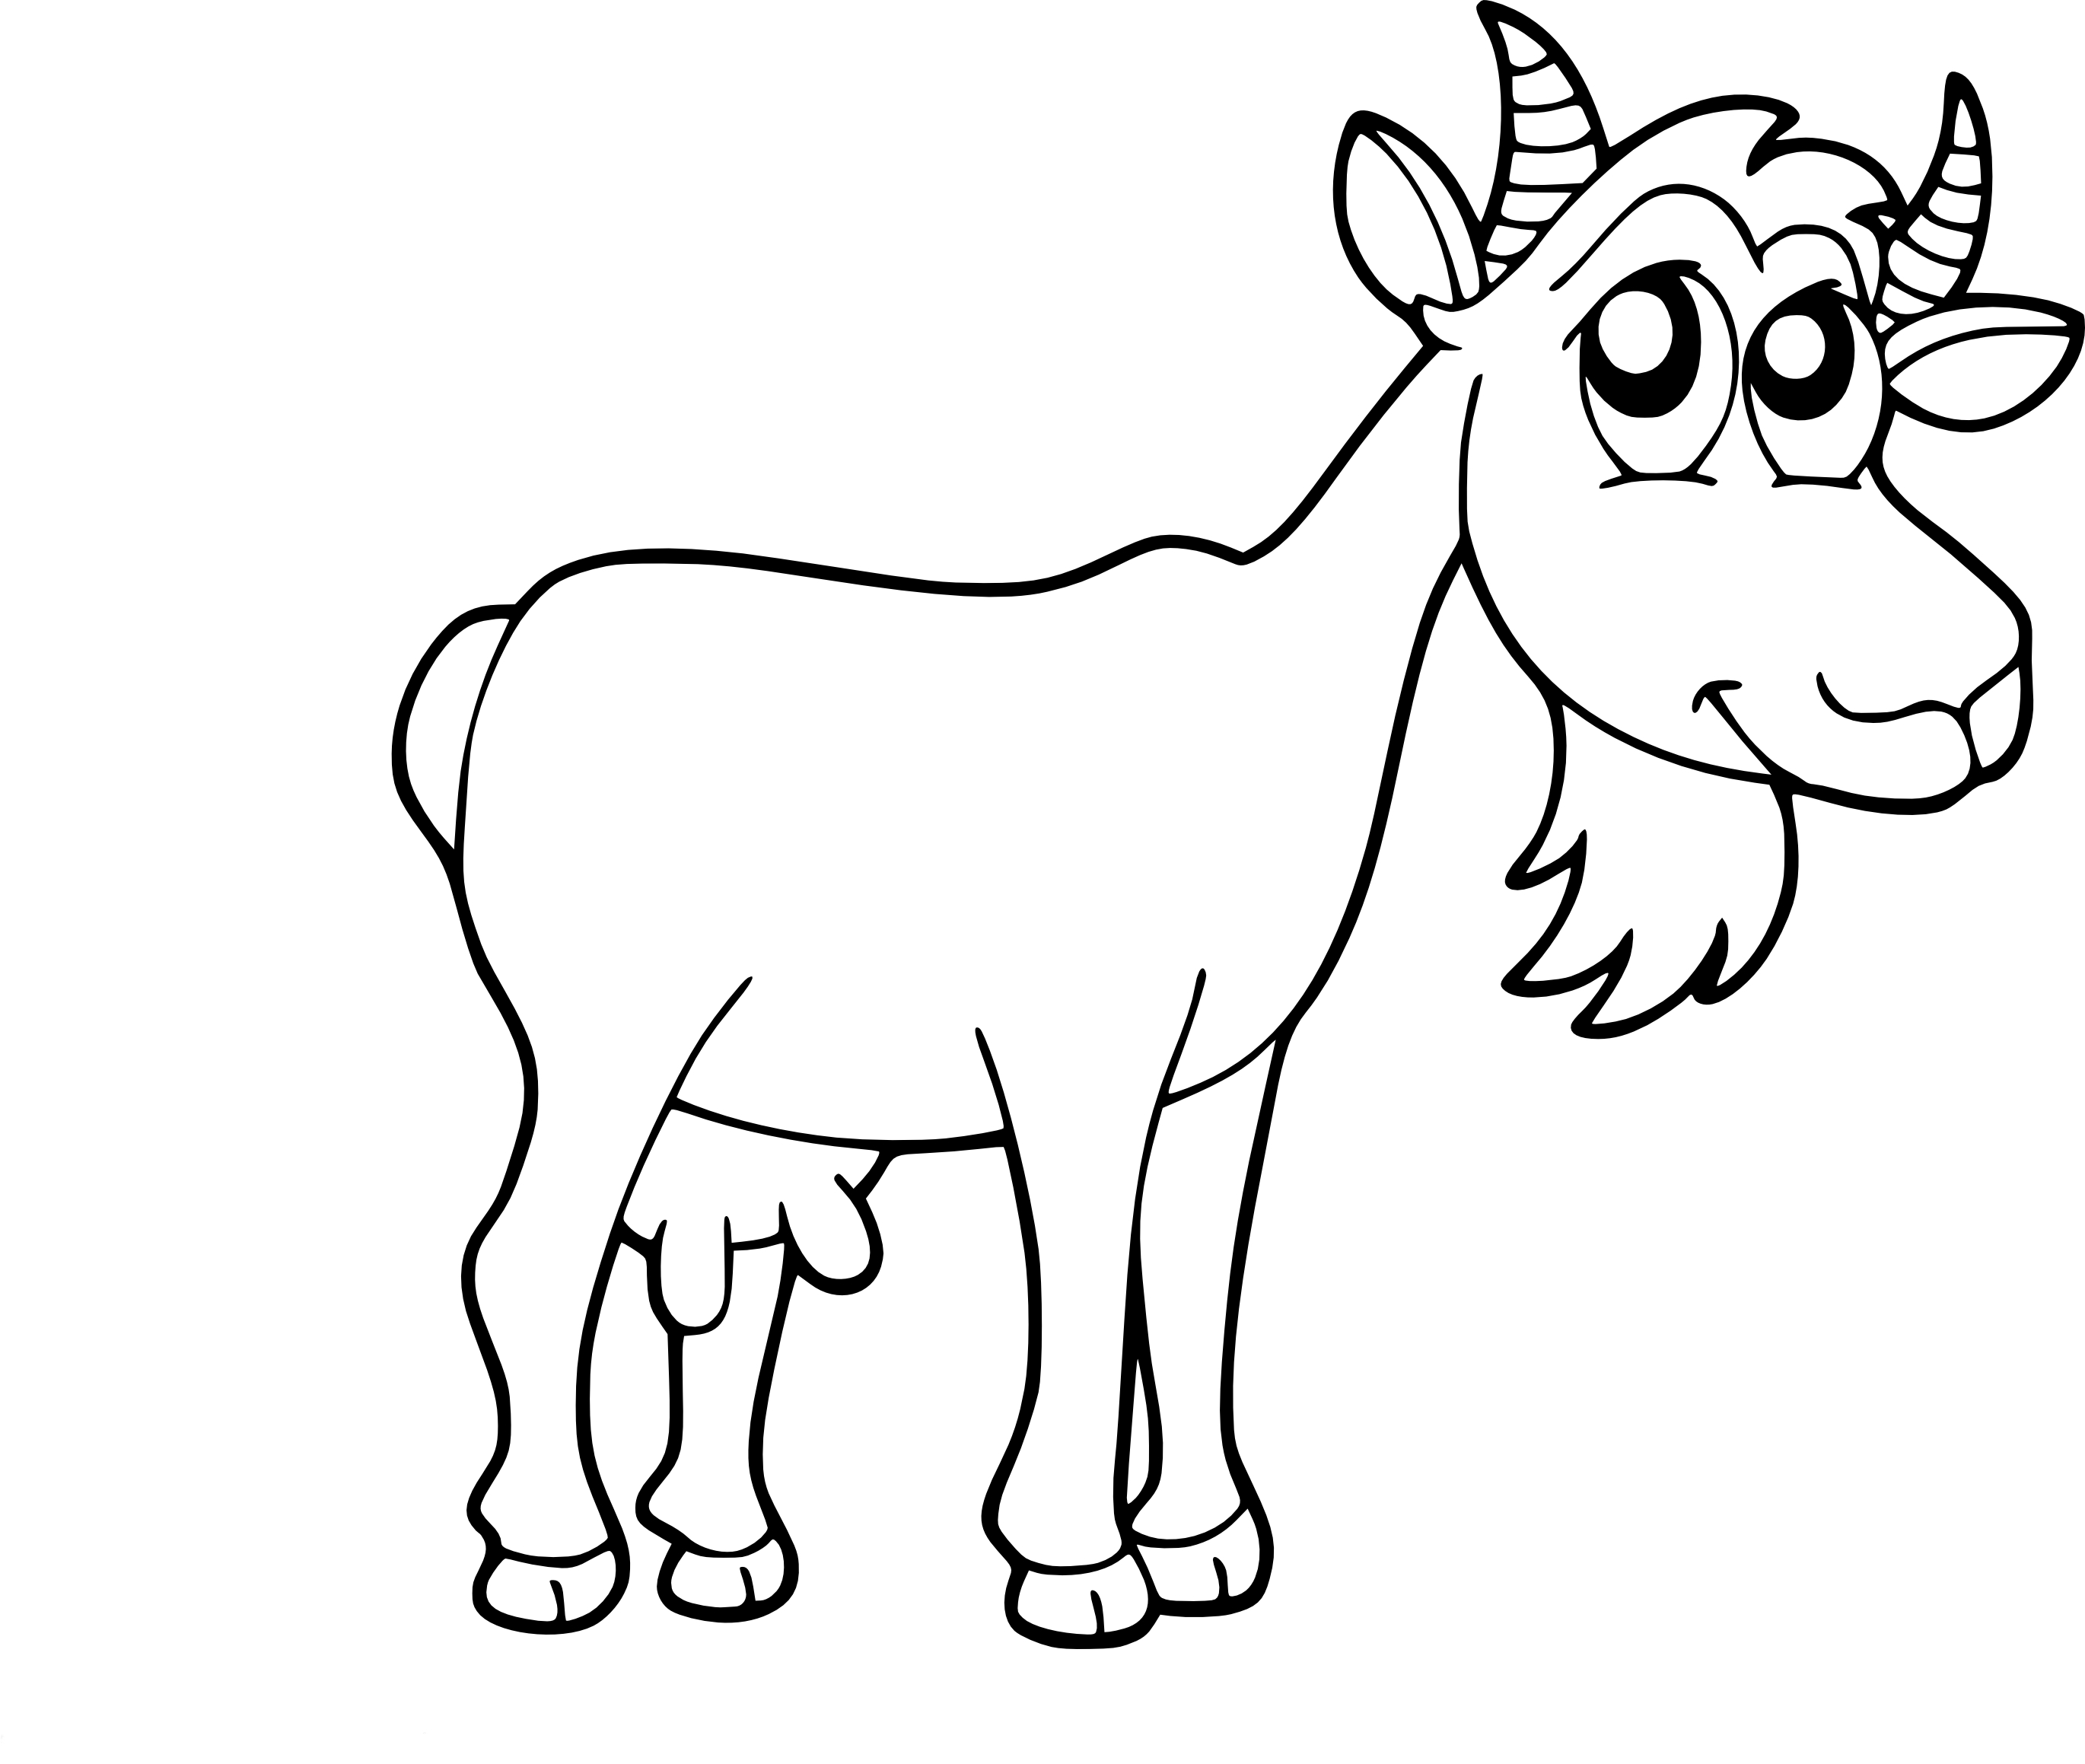 Goat Design coloring page